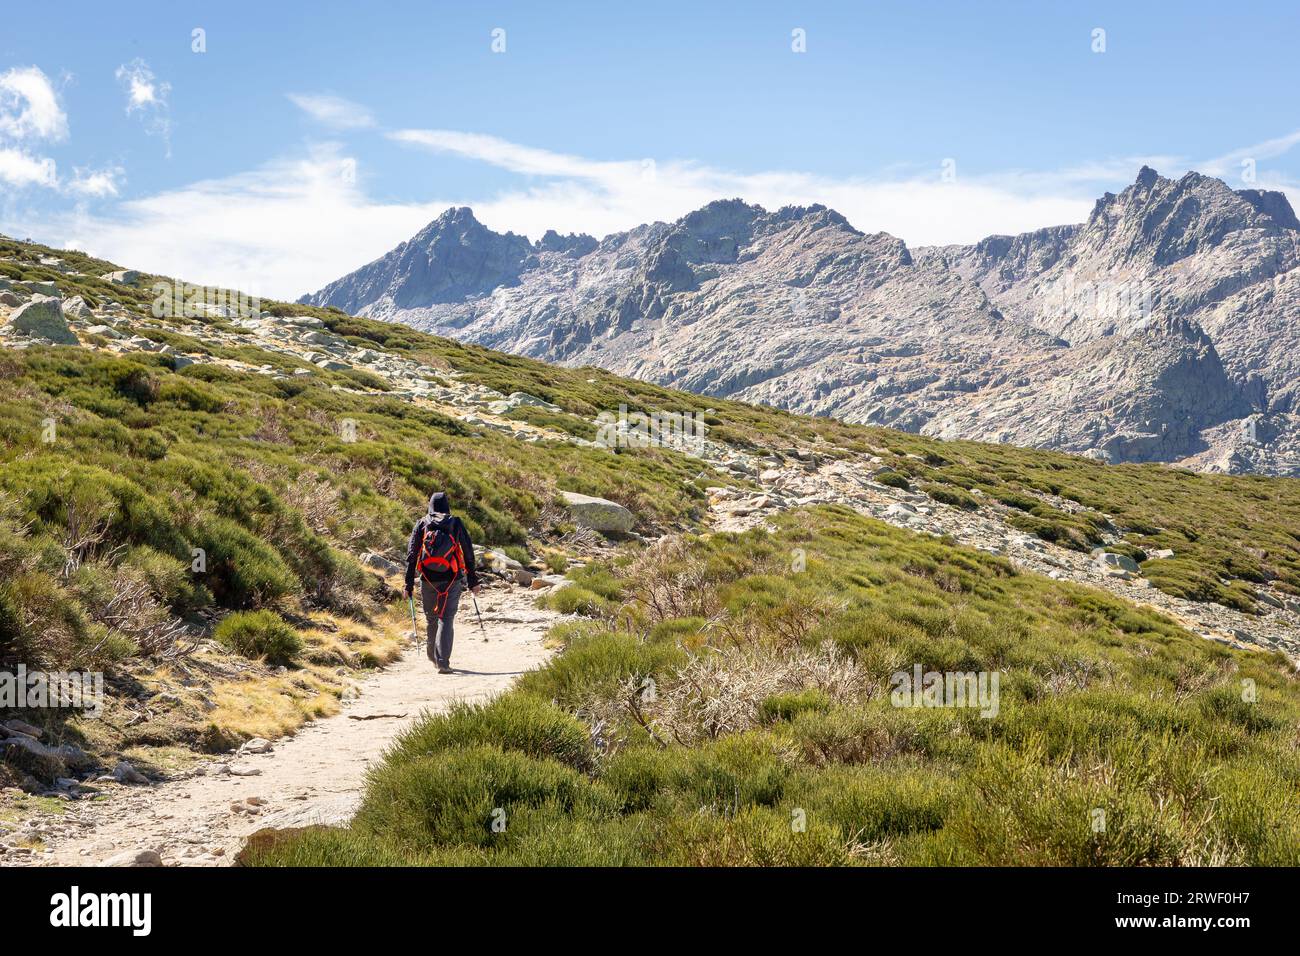 Tourist hiking on a dirt trail to the Laguna Grande de Gredos lake from the Plataforma de Gredos in Sierra de Gredos mountains, dry brown grass, Spain. Stock Photo